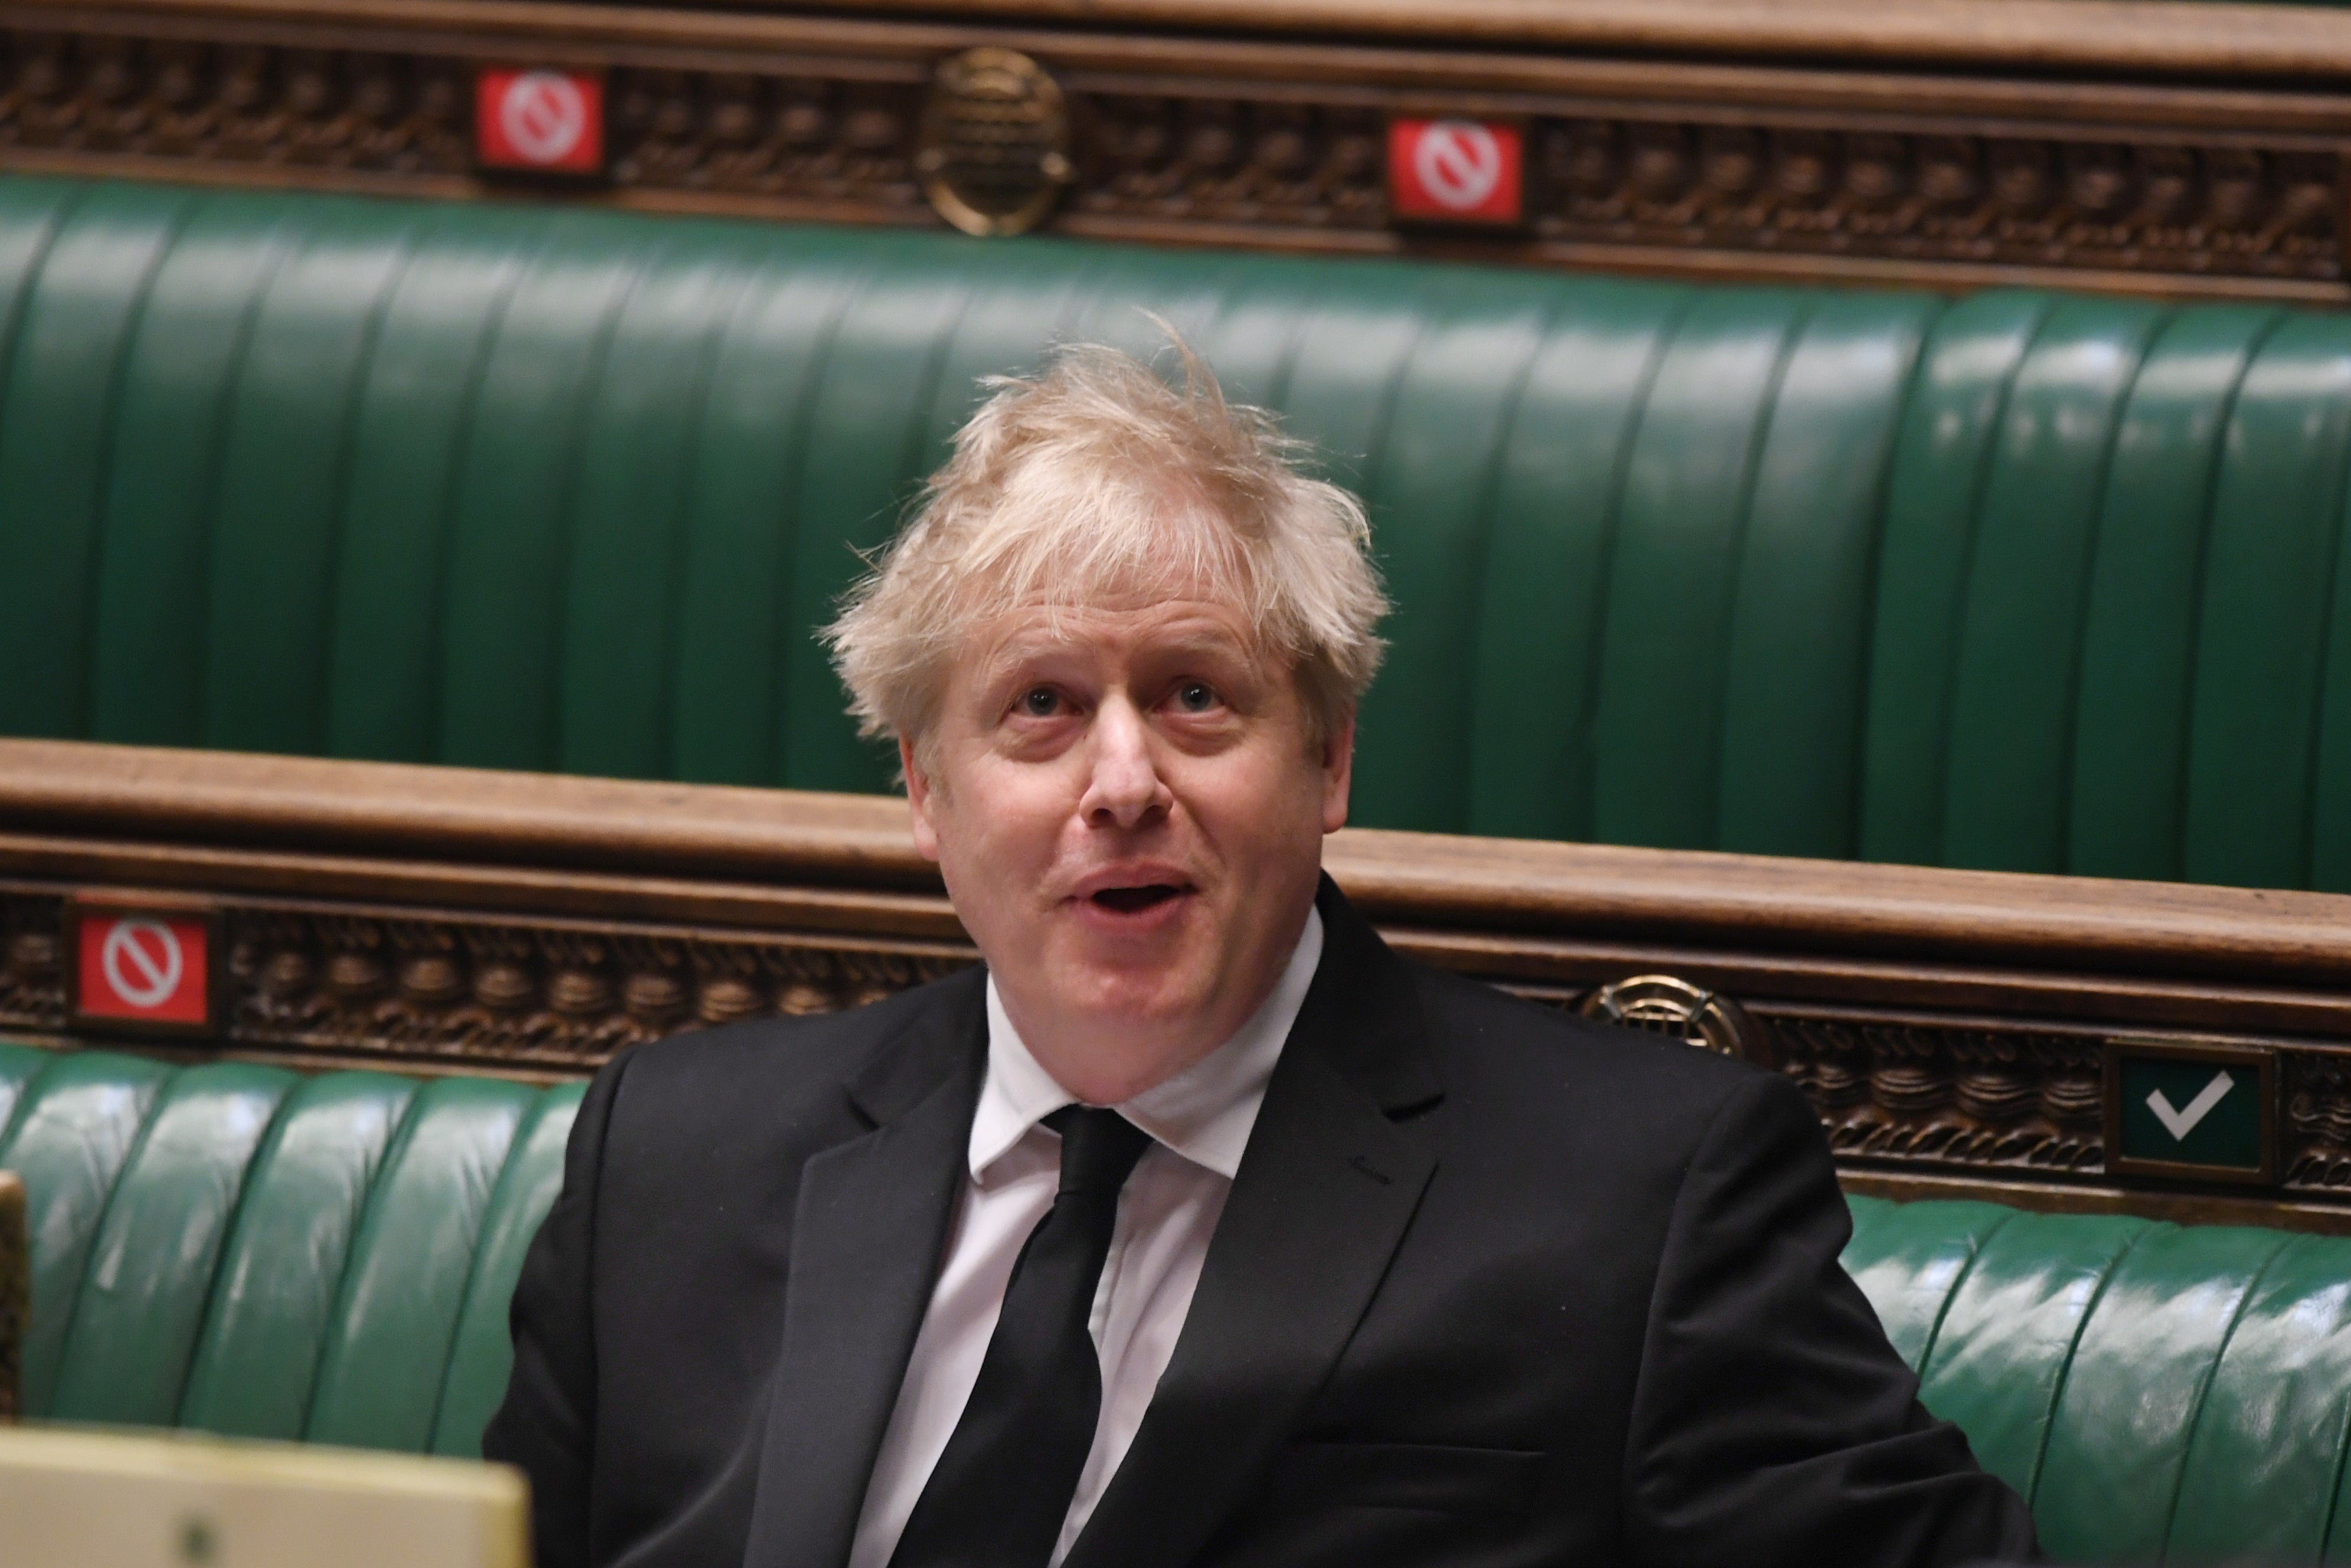 Boris Johnson pictured in the House of Commons on Wednesday during PMQs